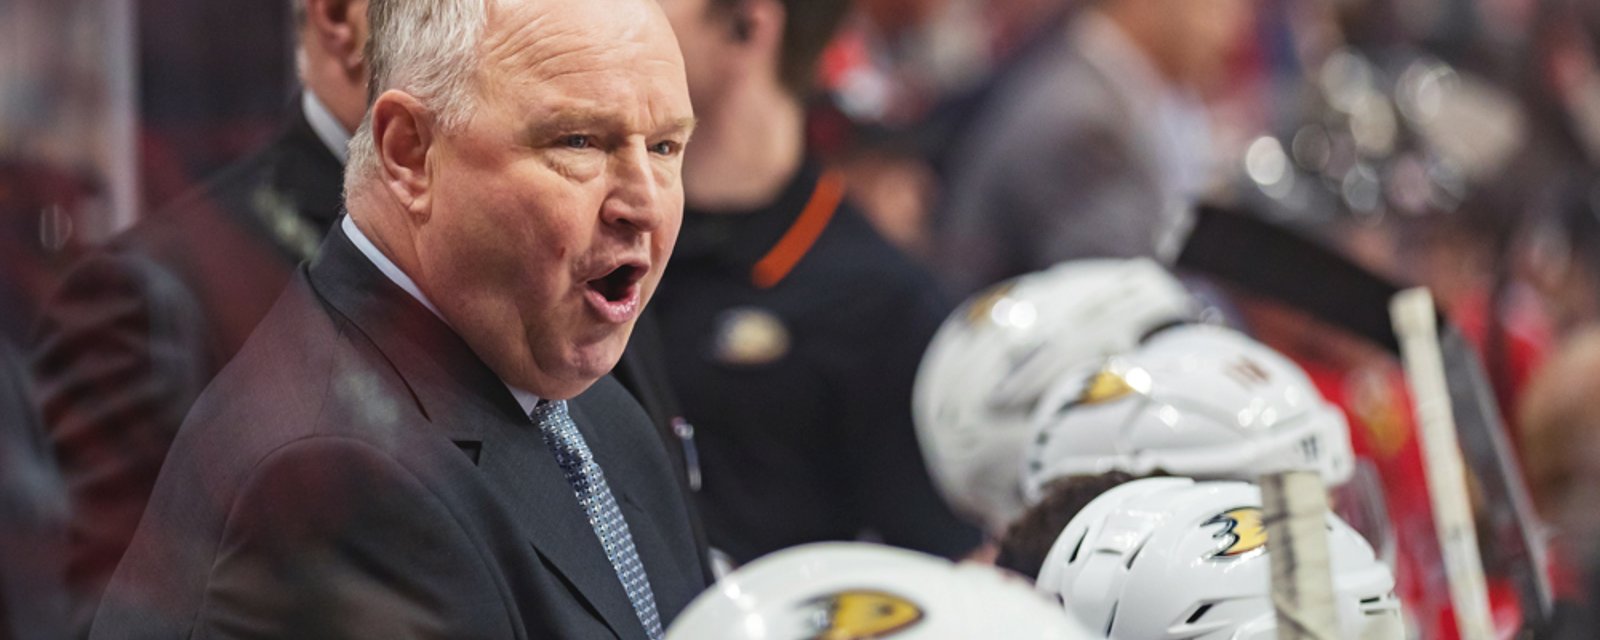 Anaheim Ducks head coach made controversial comments following elimination.